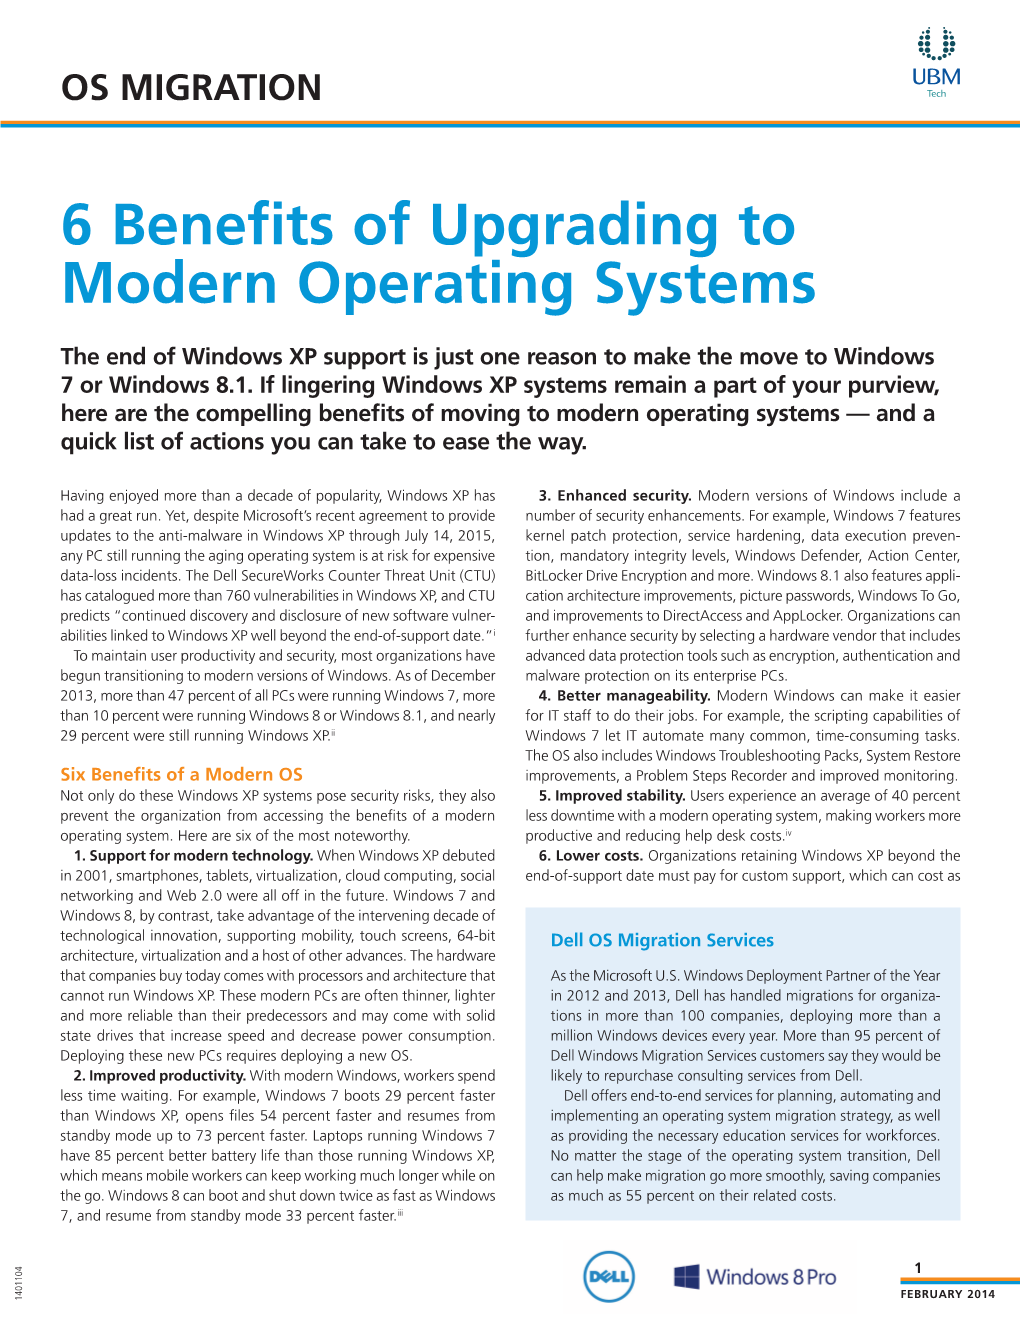 6 Benefits of Upgrading to Modern Operating Systems